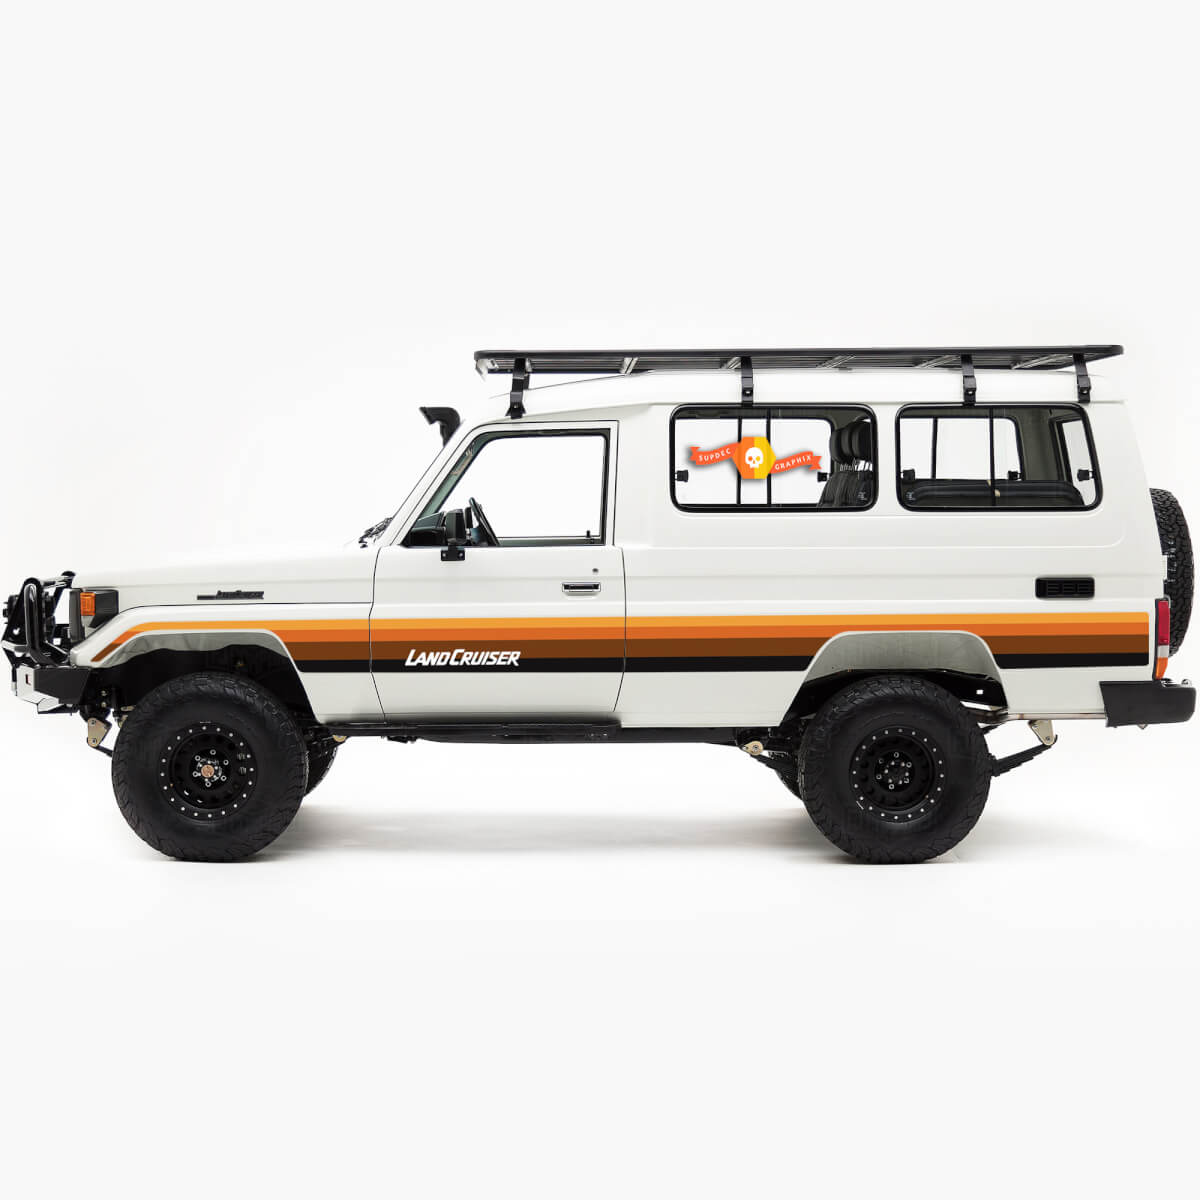 2 TOYOTA Land Cruiser LANDCRUISER TROOPY 75 Series EARTH TONES Sunset Graphics Stripes